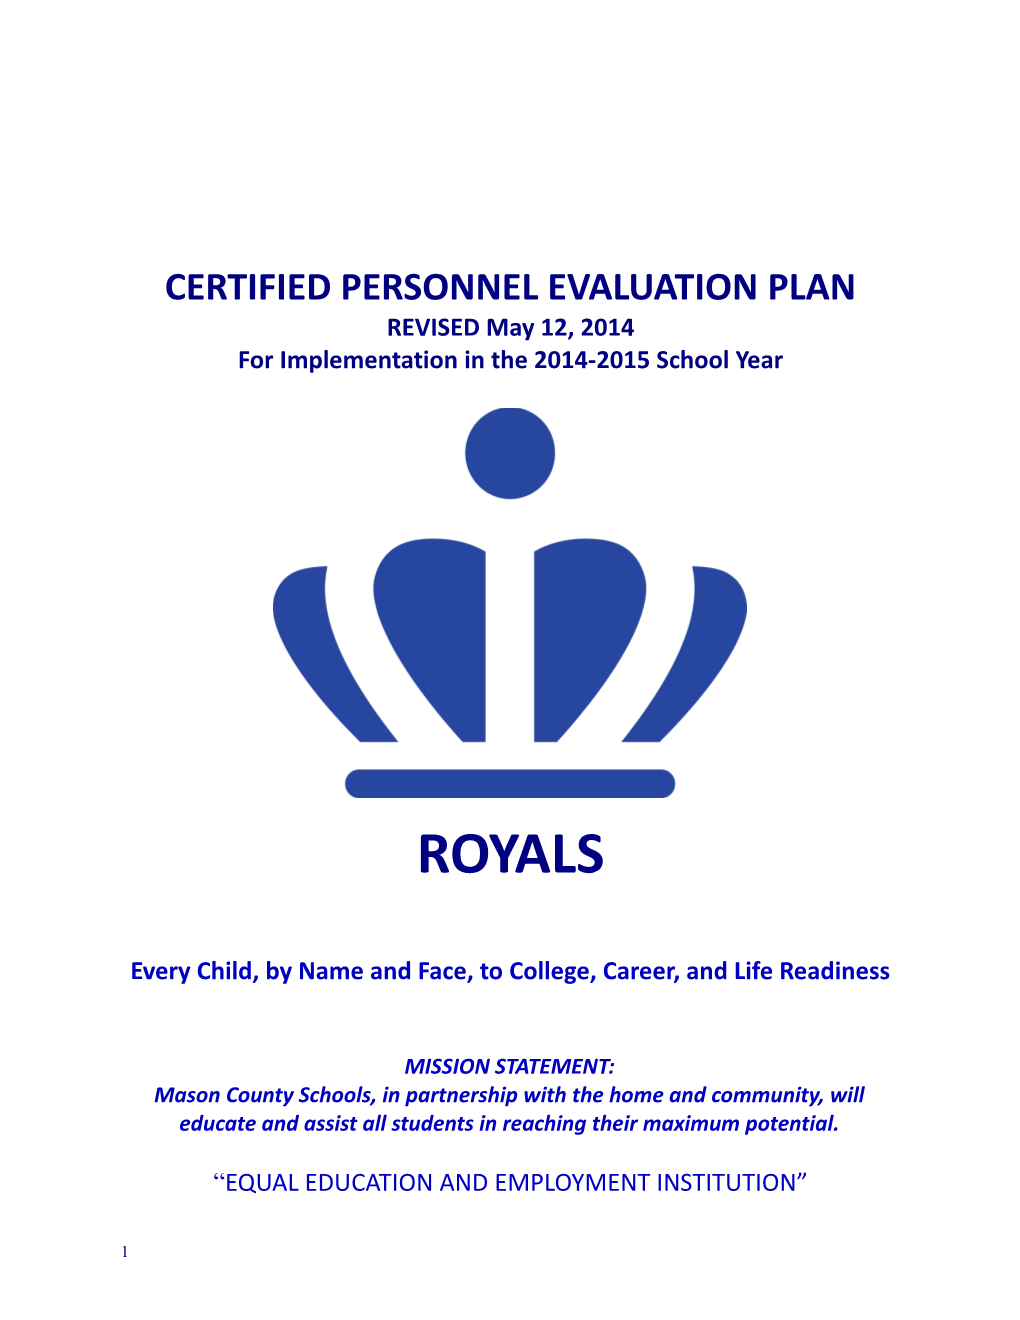 Certified Personnel Evaluation Plan